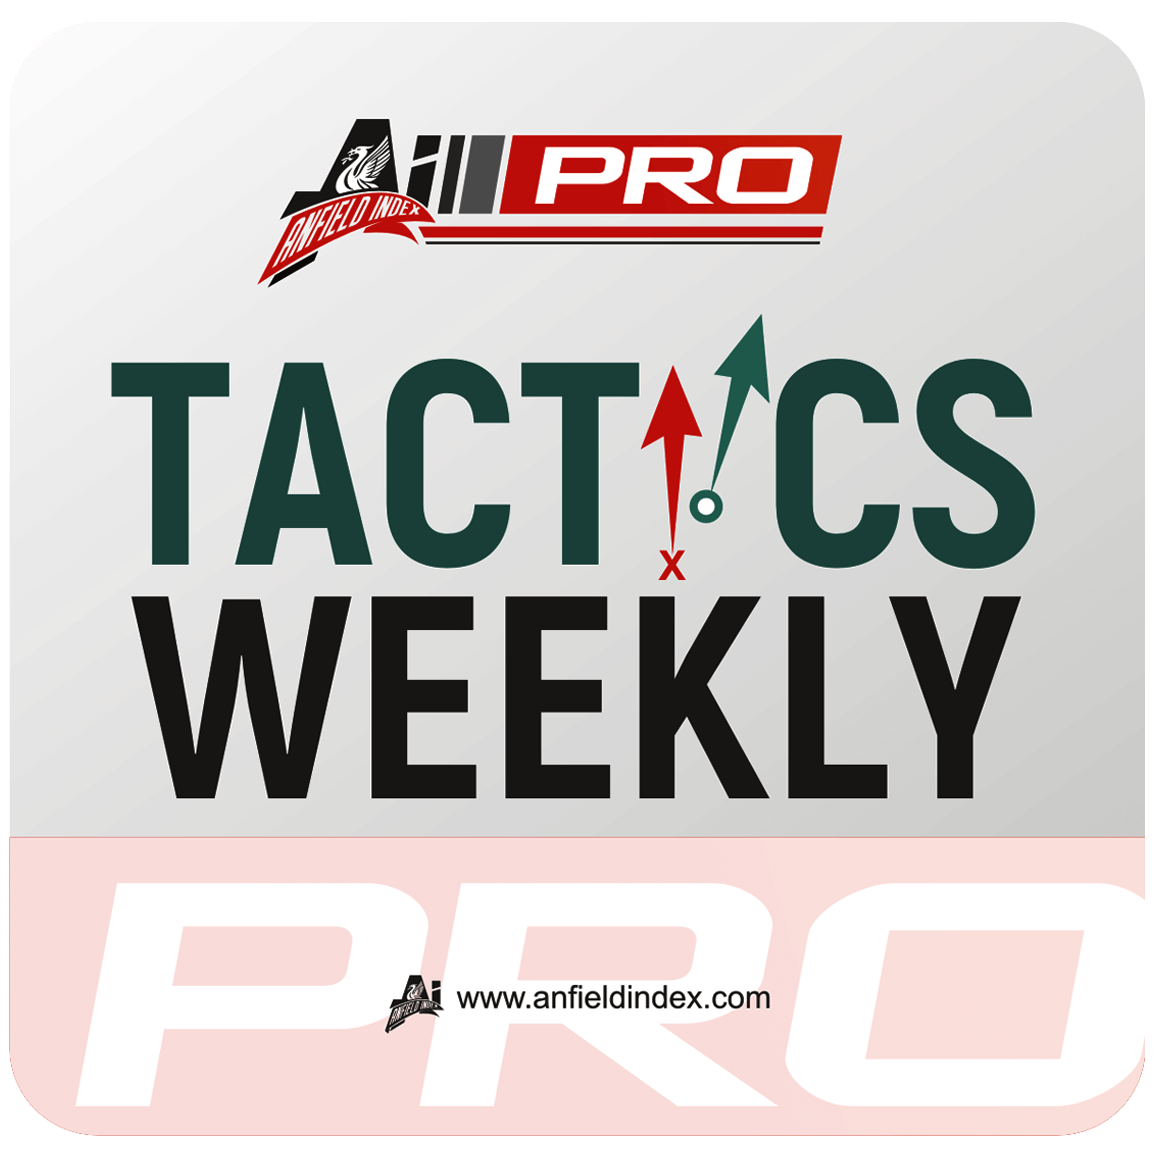 Tactics Weekly: Liverpool in Attack: Random or Tactical?